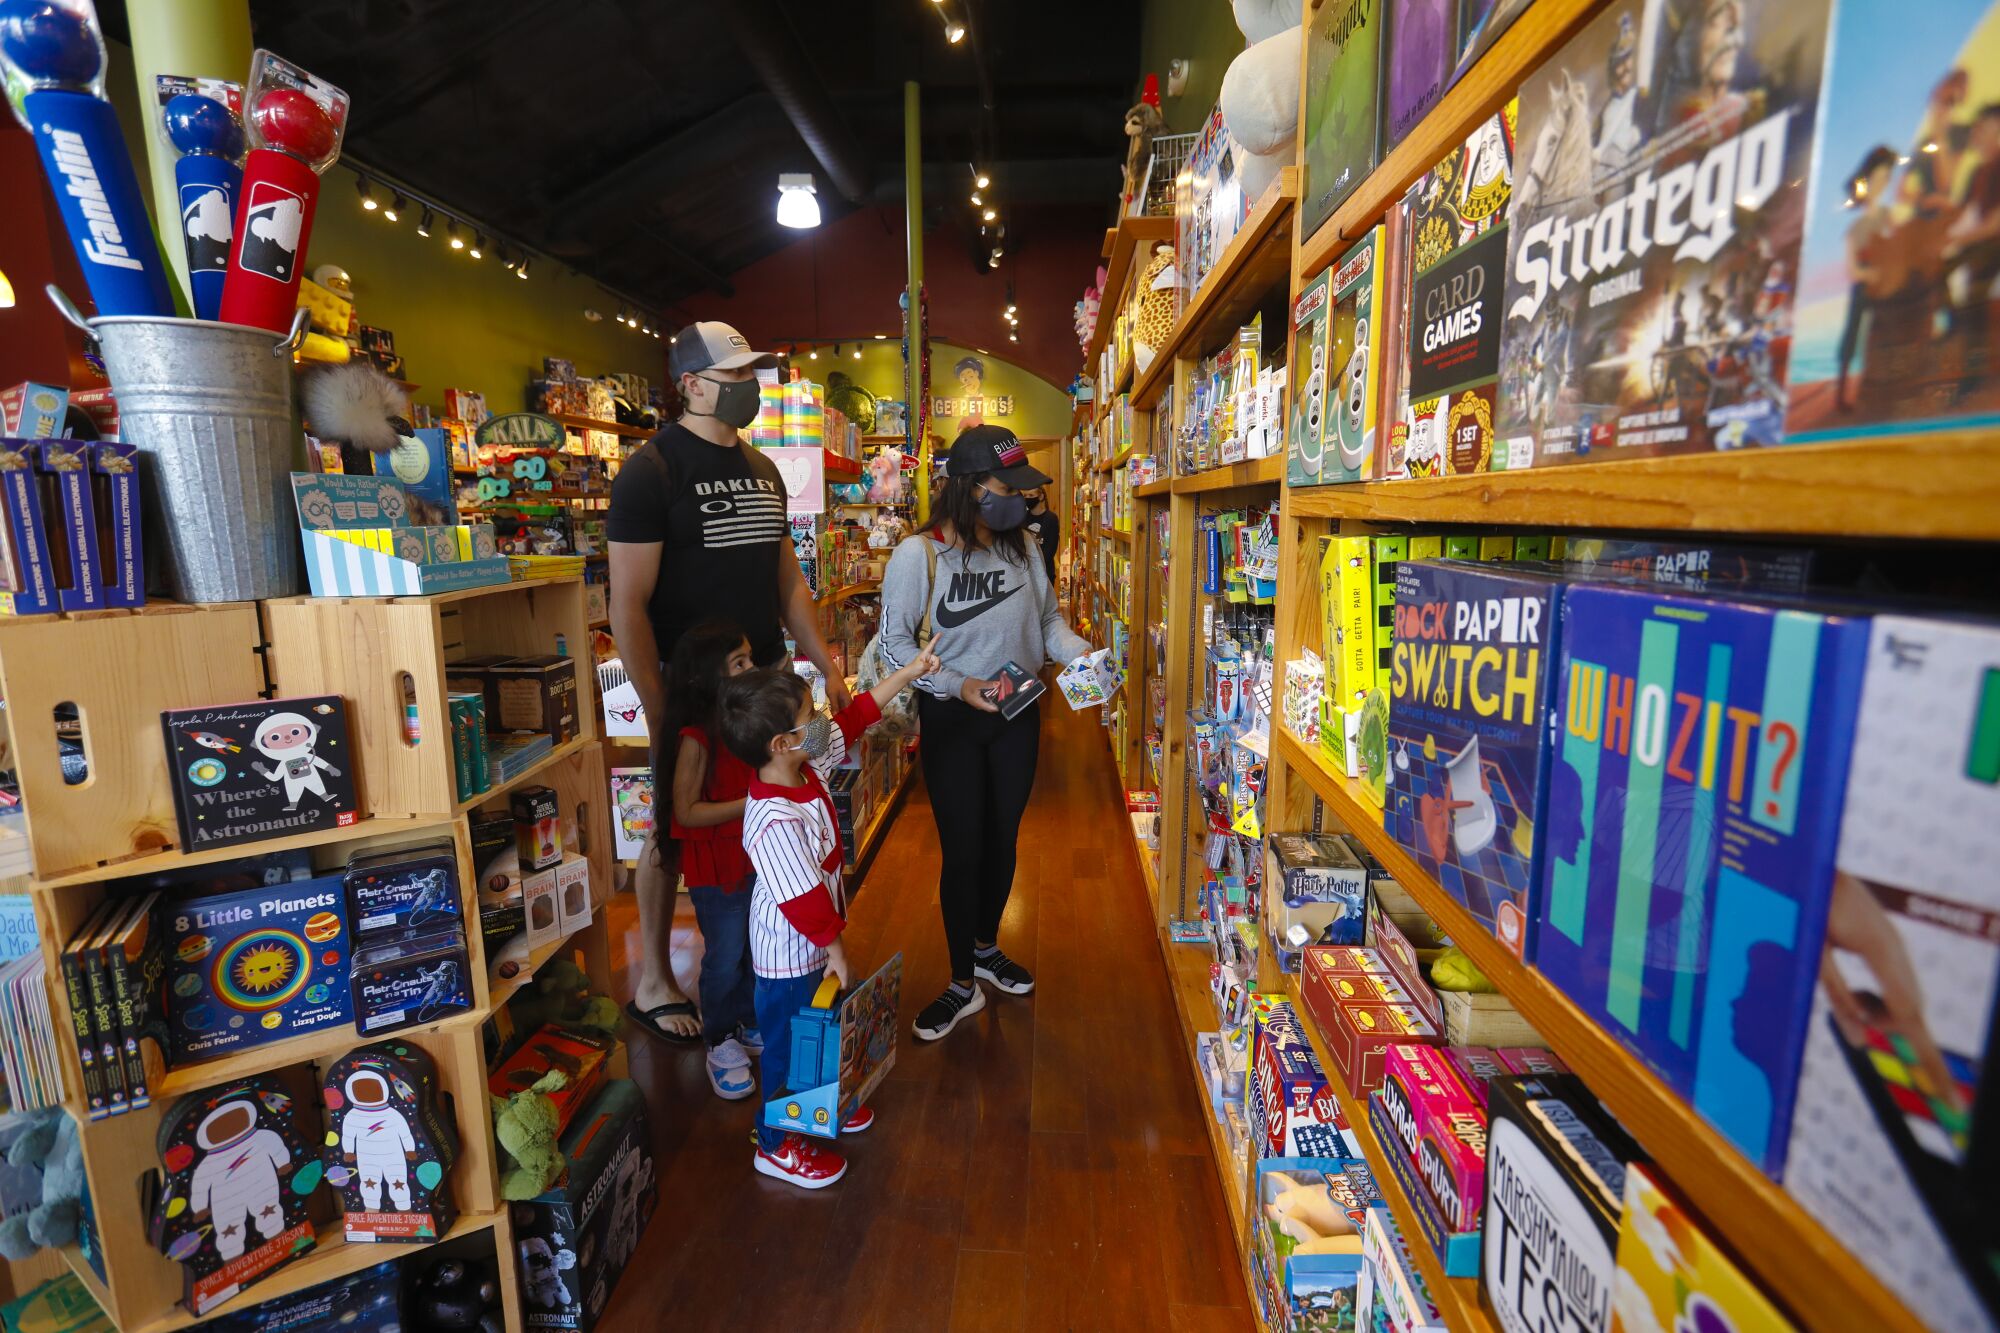 Customers browse Geppetto's Toys at Westfield UTC mall in May 2020.